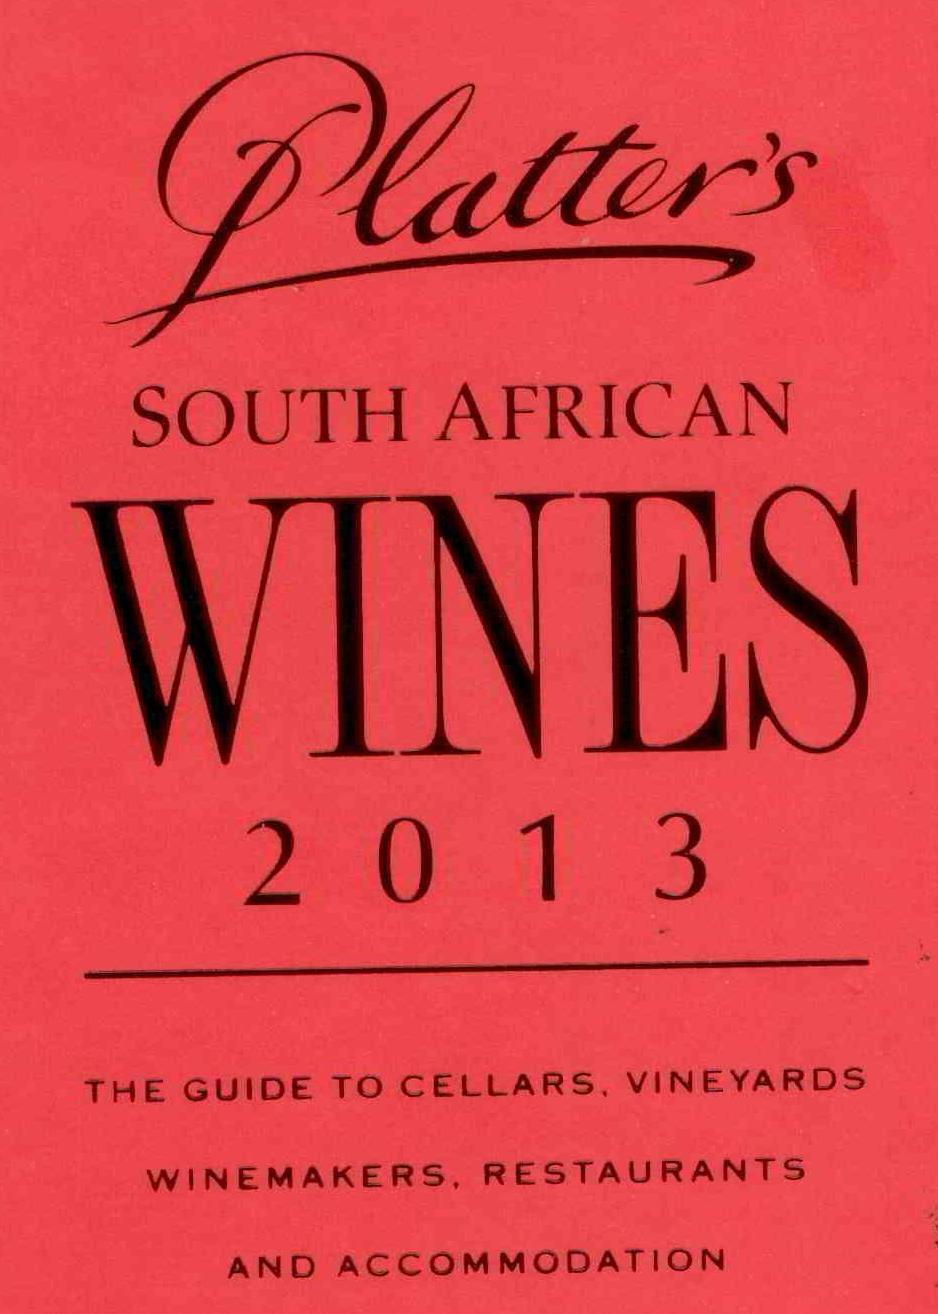 Wine Tours of Hermanus with Percy Tours in the John Platter wine book of South Africa, near Cape Town